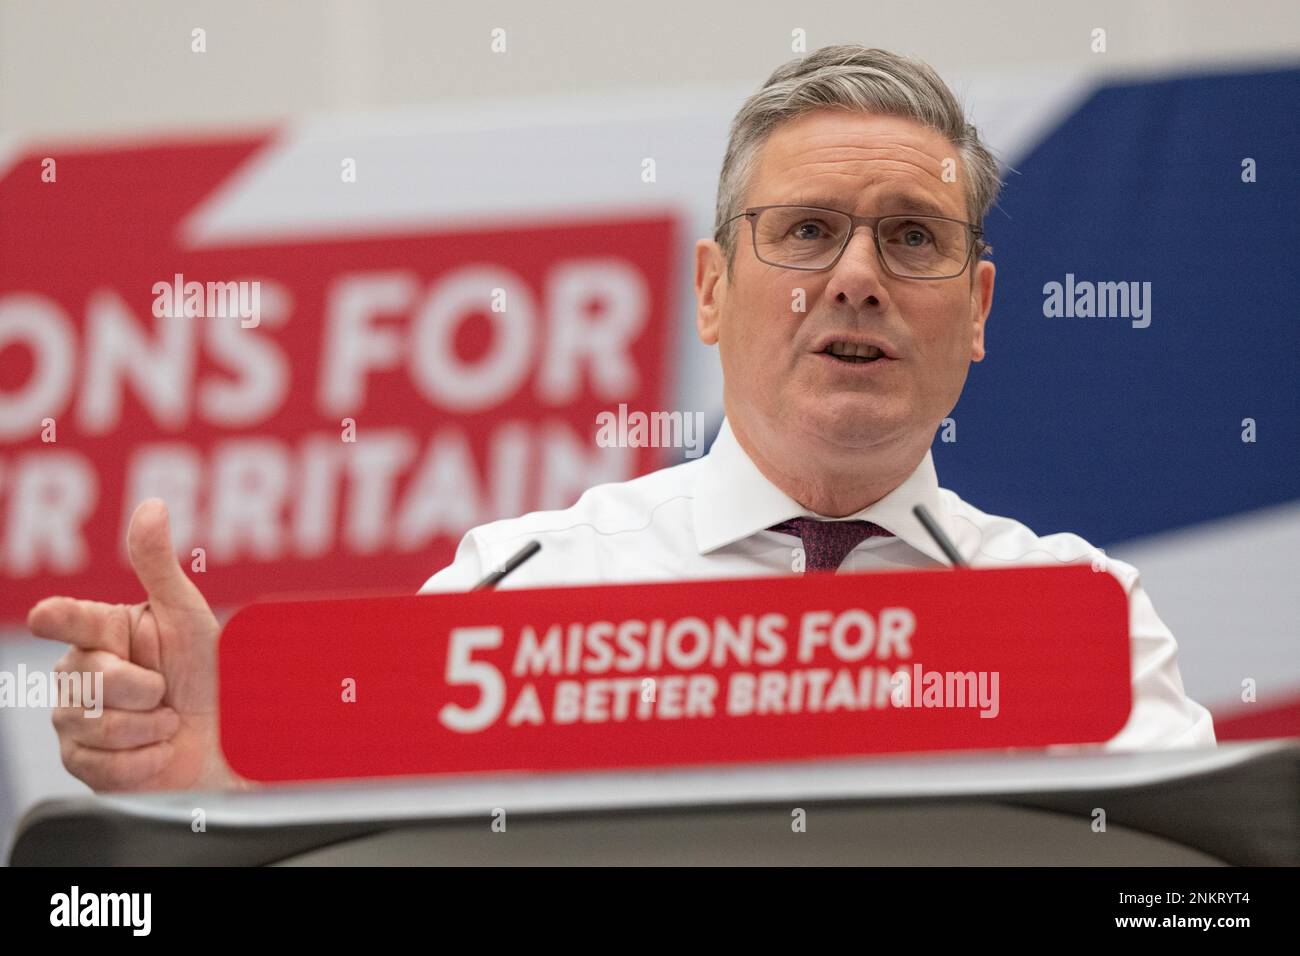 Manchester UK. 23/02/2023, Keir Starmer launches five bold missions for a better Britain at 1 Angel Square, Manchester UK. The Labour leader spoke in front of shadow cabinet colleagues and manchester based politicians. He outlined the purpose of missions as. “It means providing a clear set of priorities”.  A relentless focus on the things that matter at can ‘fix the fundamentals.” Picture: garyroberts/worldwidefeatures.com Stock Photo